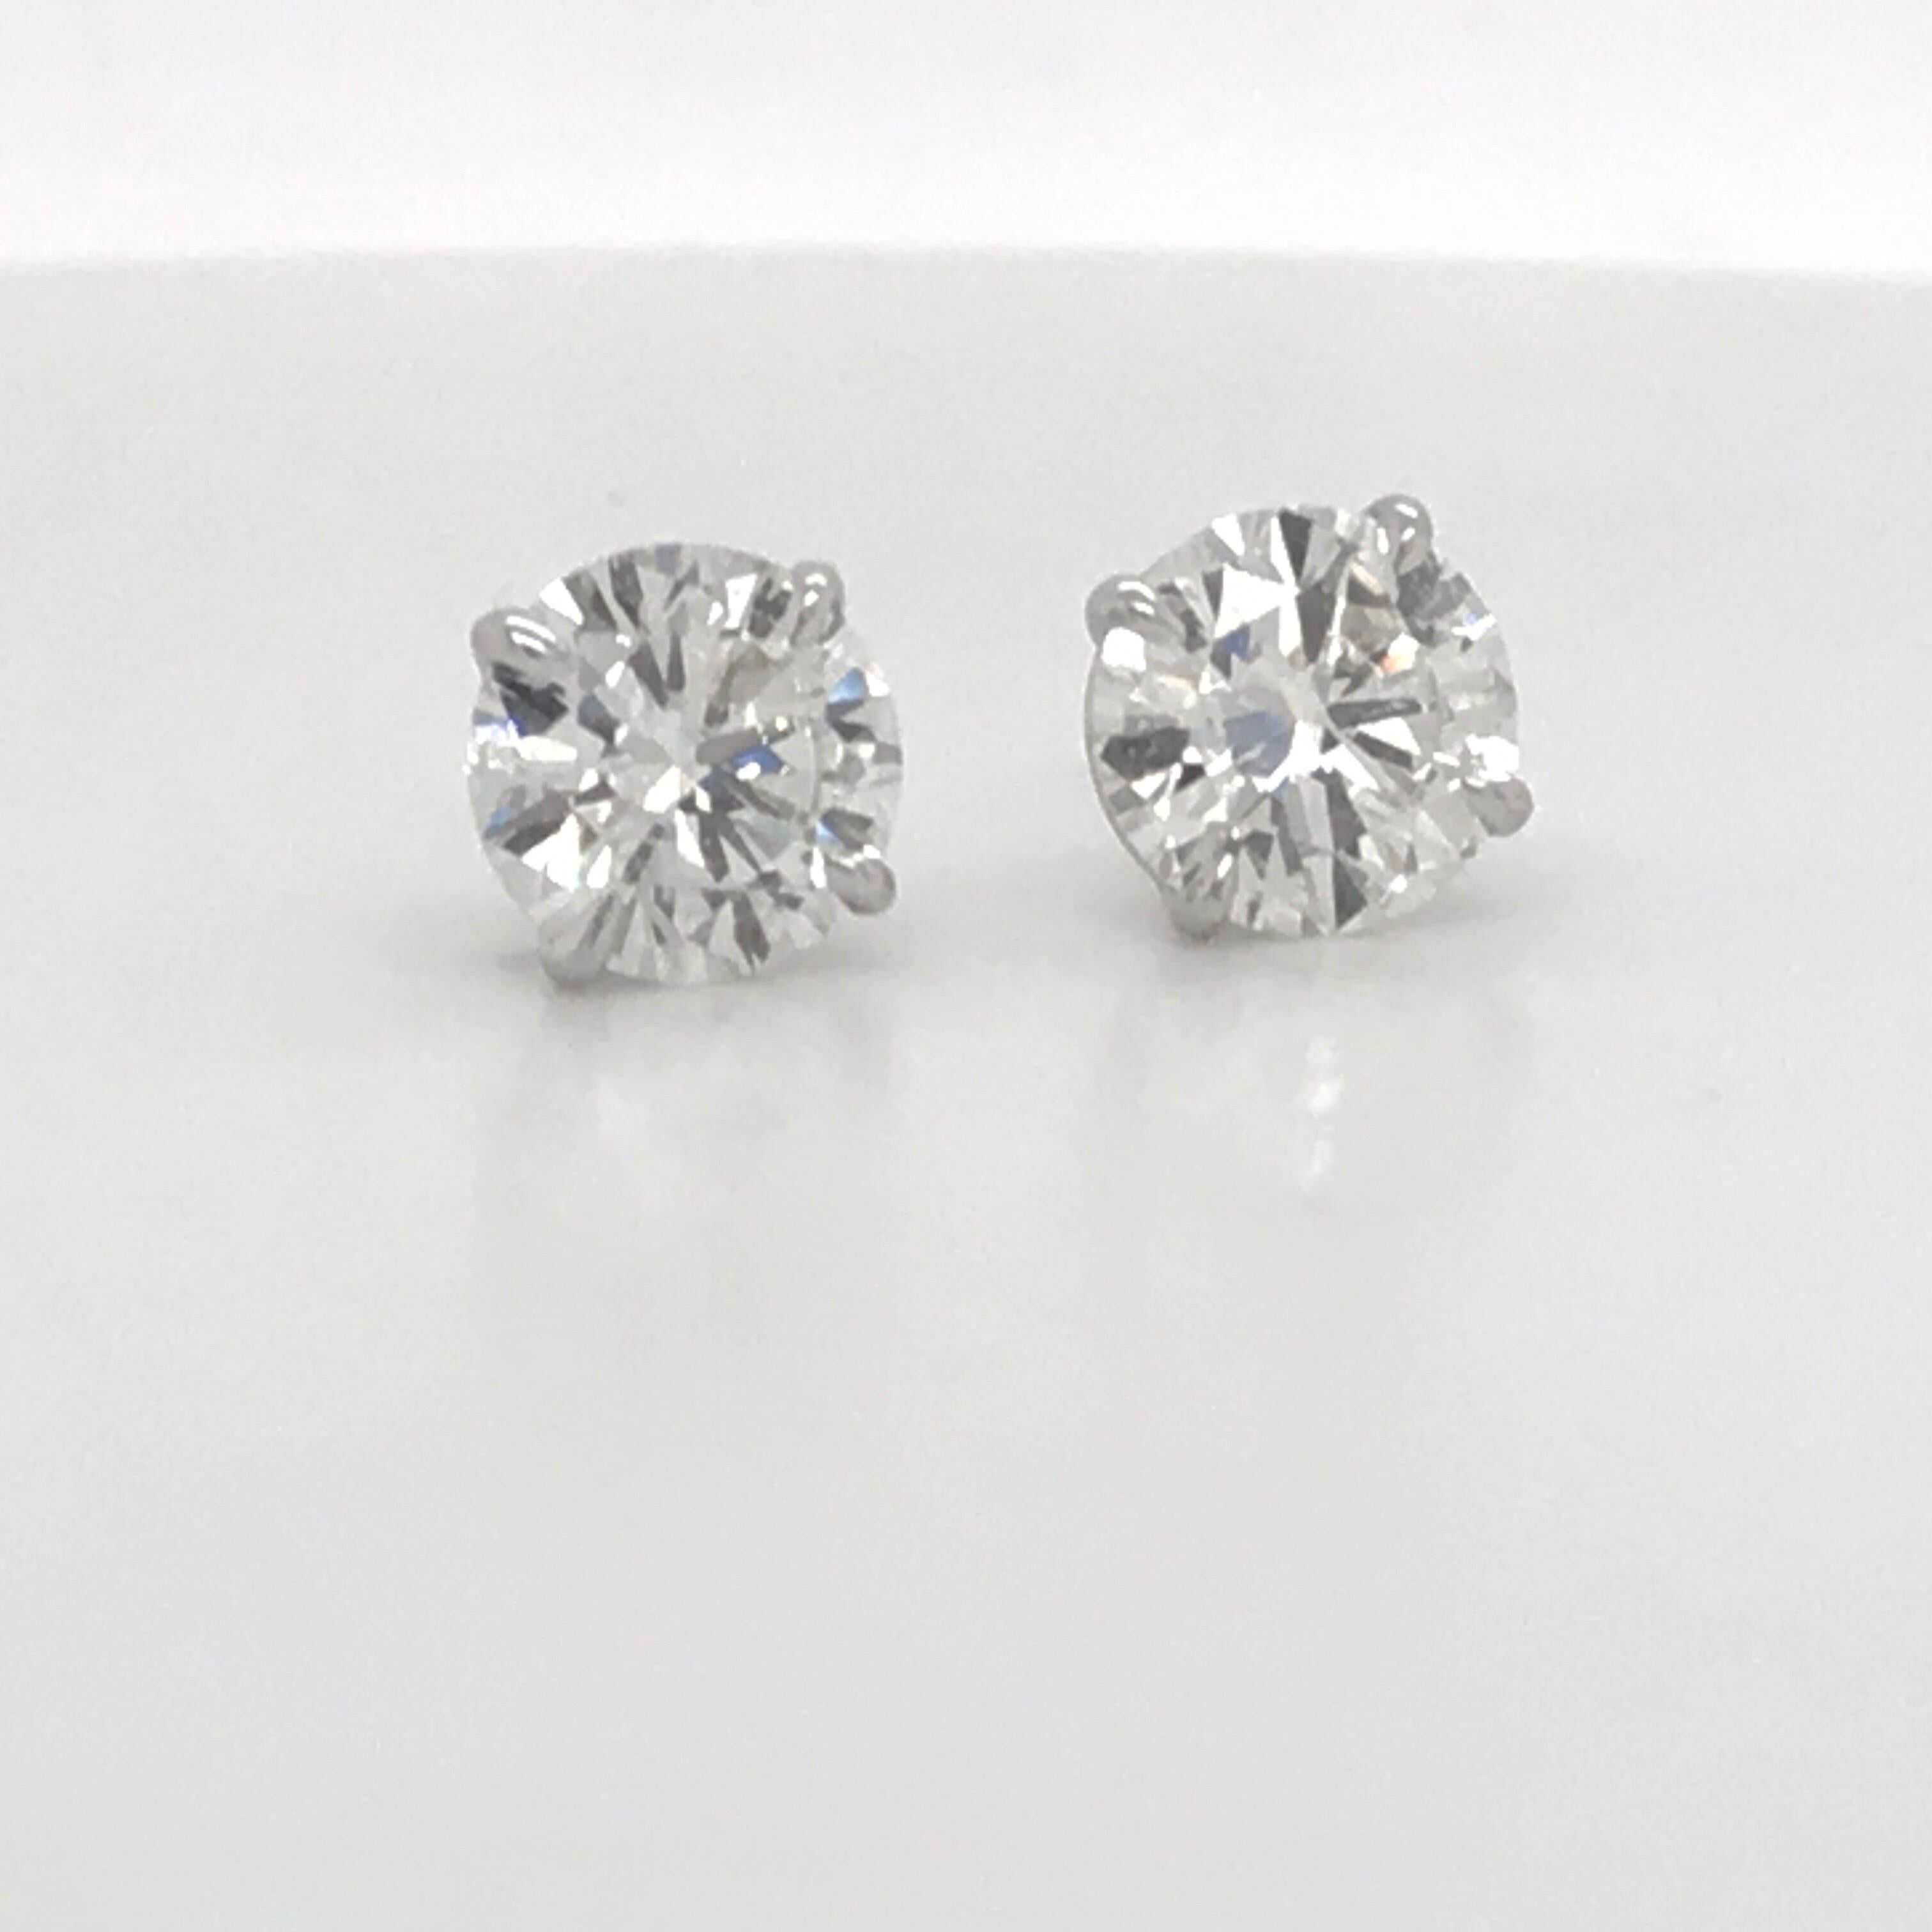 Diamond stud earrings weighing 3.05 Carats in 18K white g 4 prong champagne setting. 
Color H 
Clarity SI3-I1
